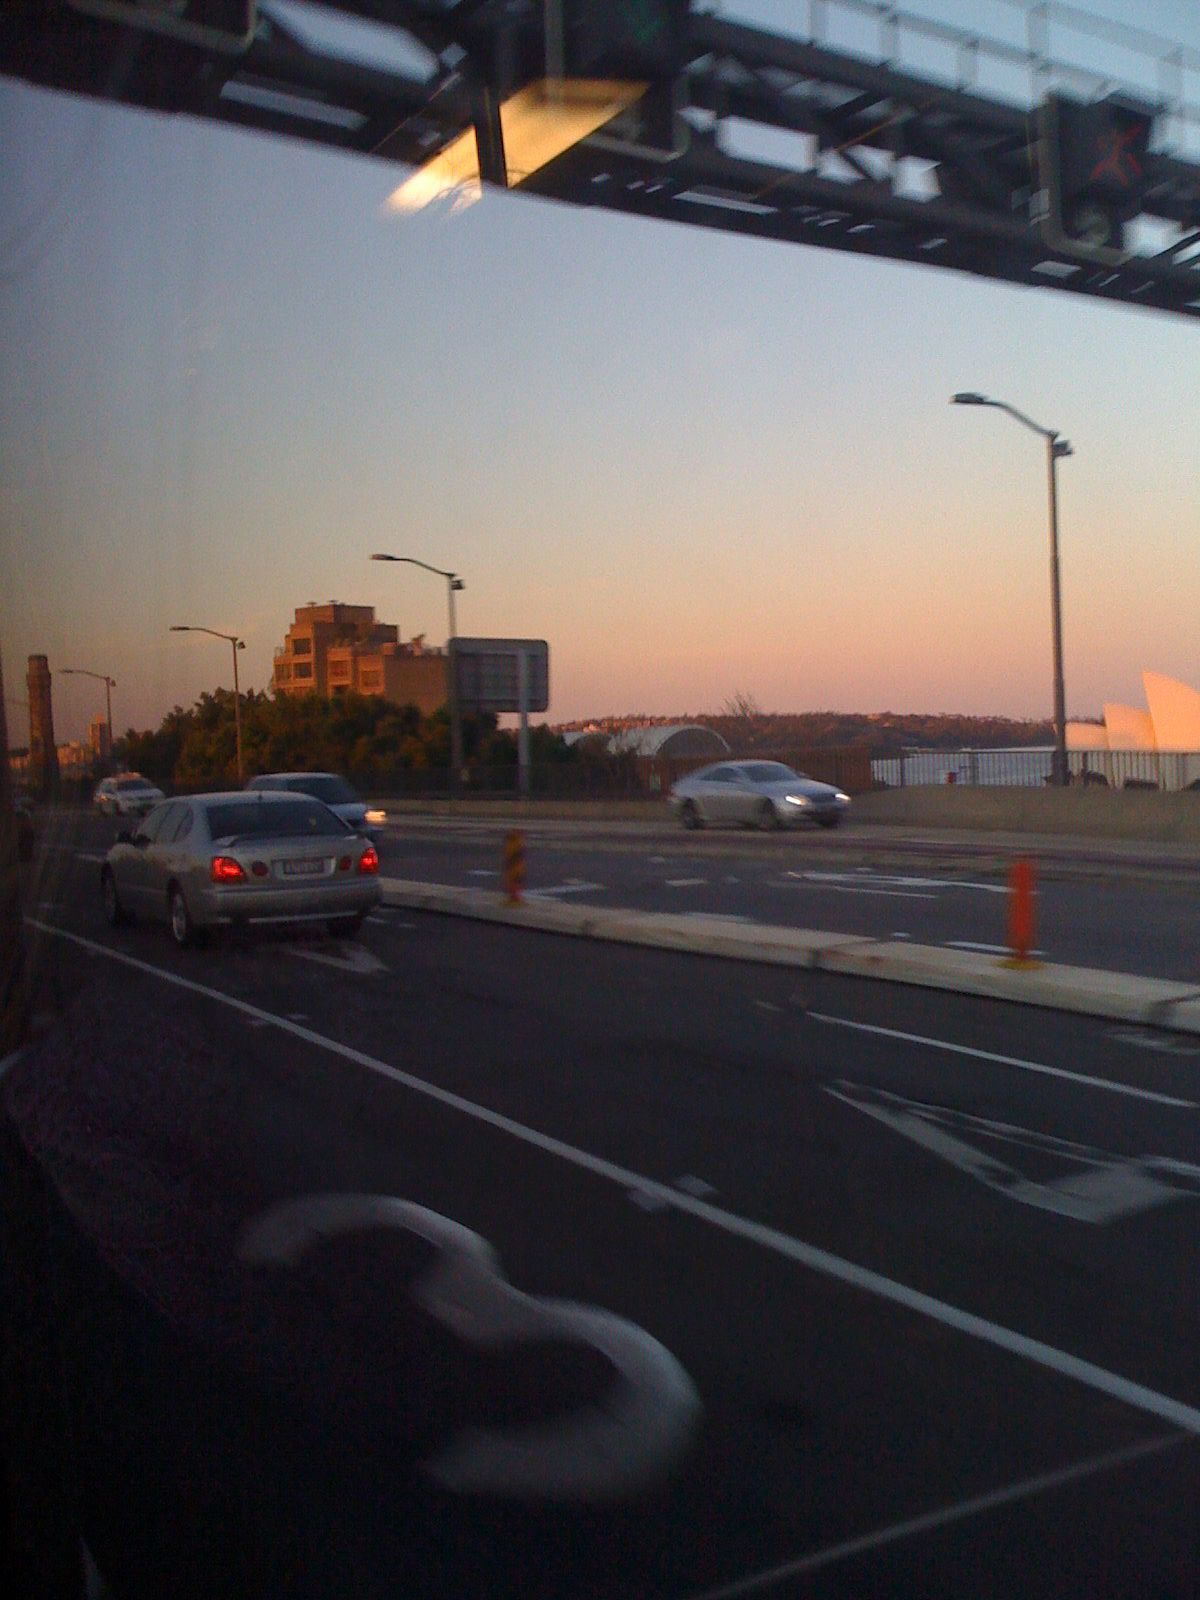 A photo looking out the window of a bus having just gotten off the Sydney Harbour Bridge. It's sunset.